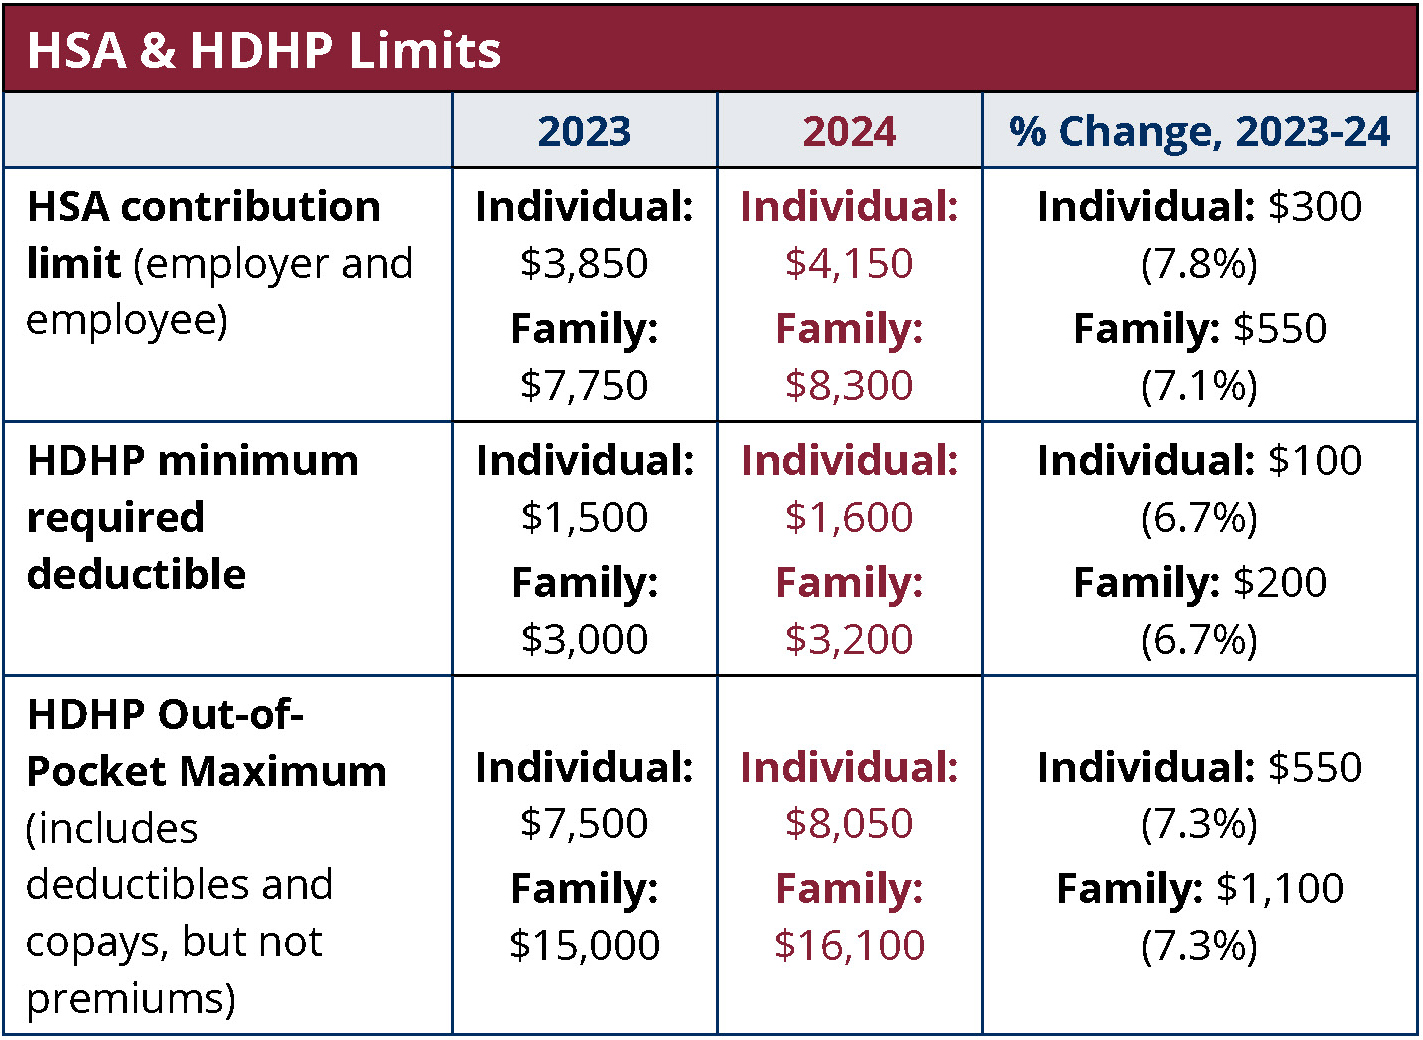 2024 HSA Contribution Limit Jumps Nearly 8 MedBen